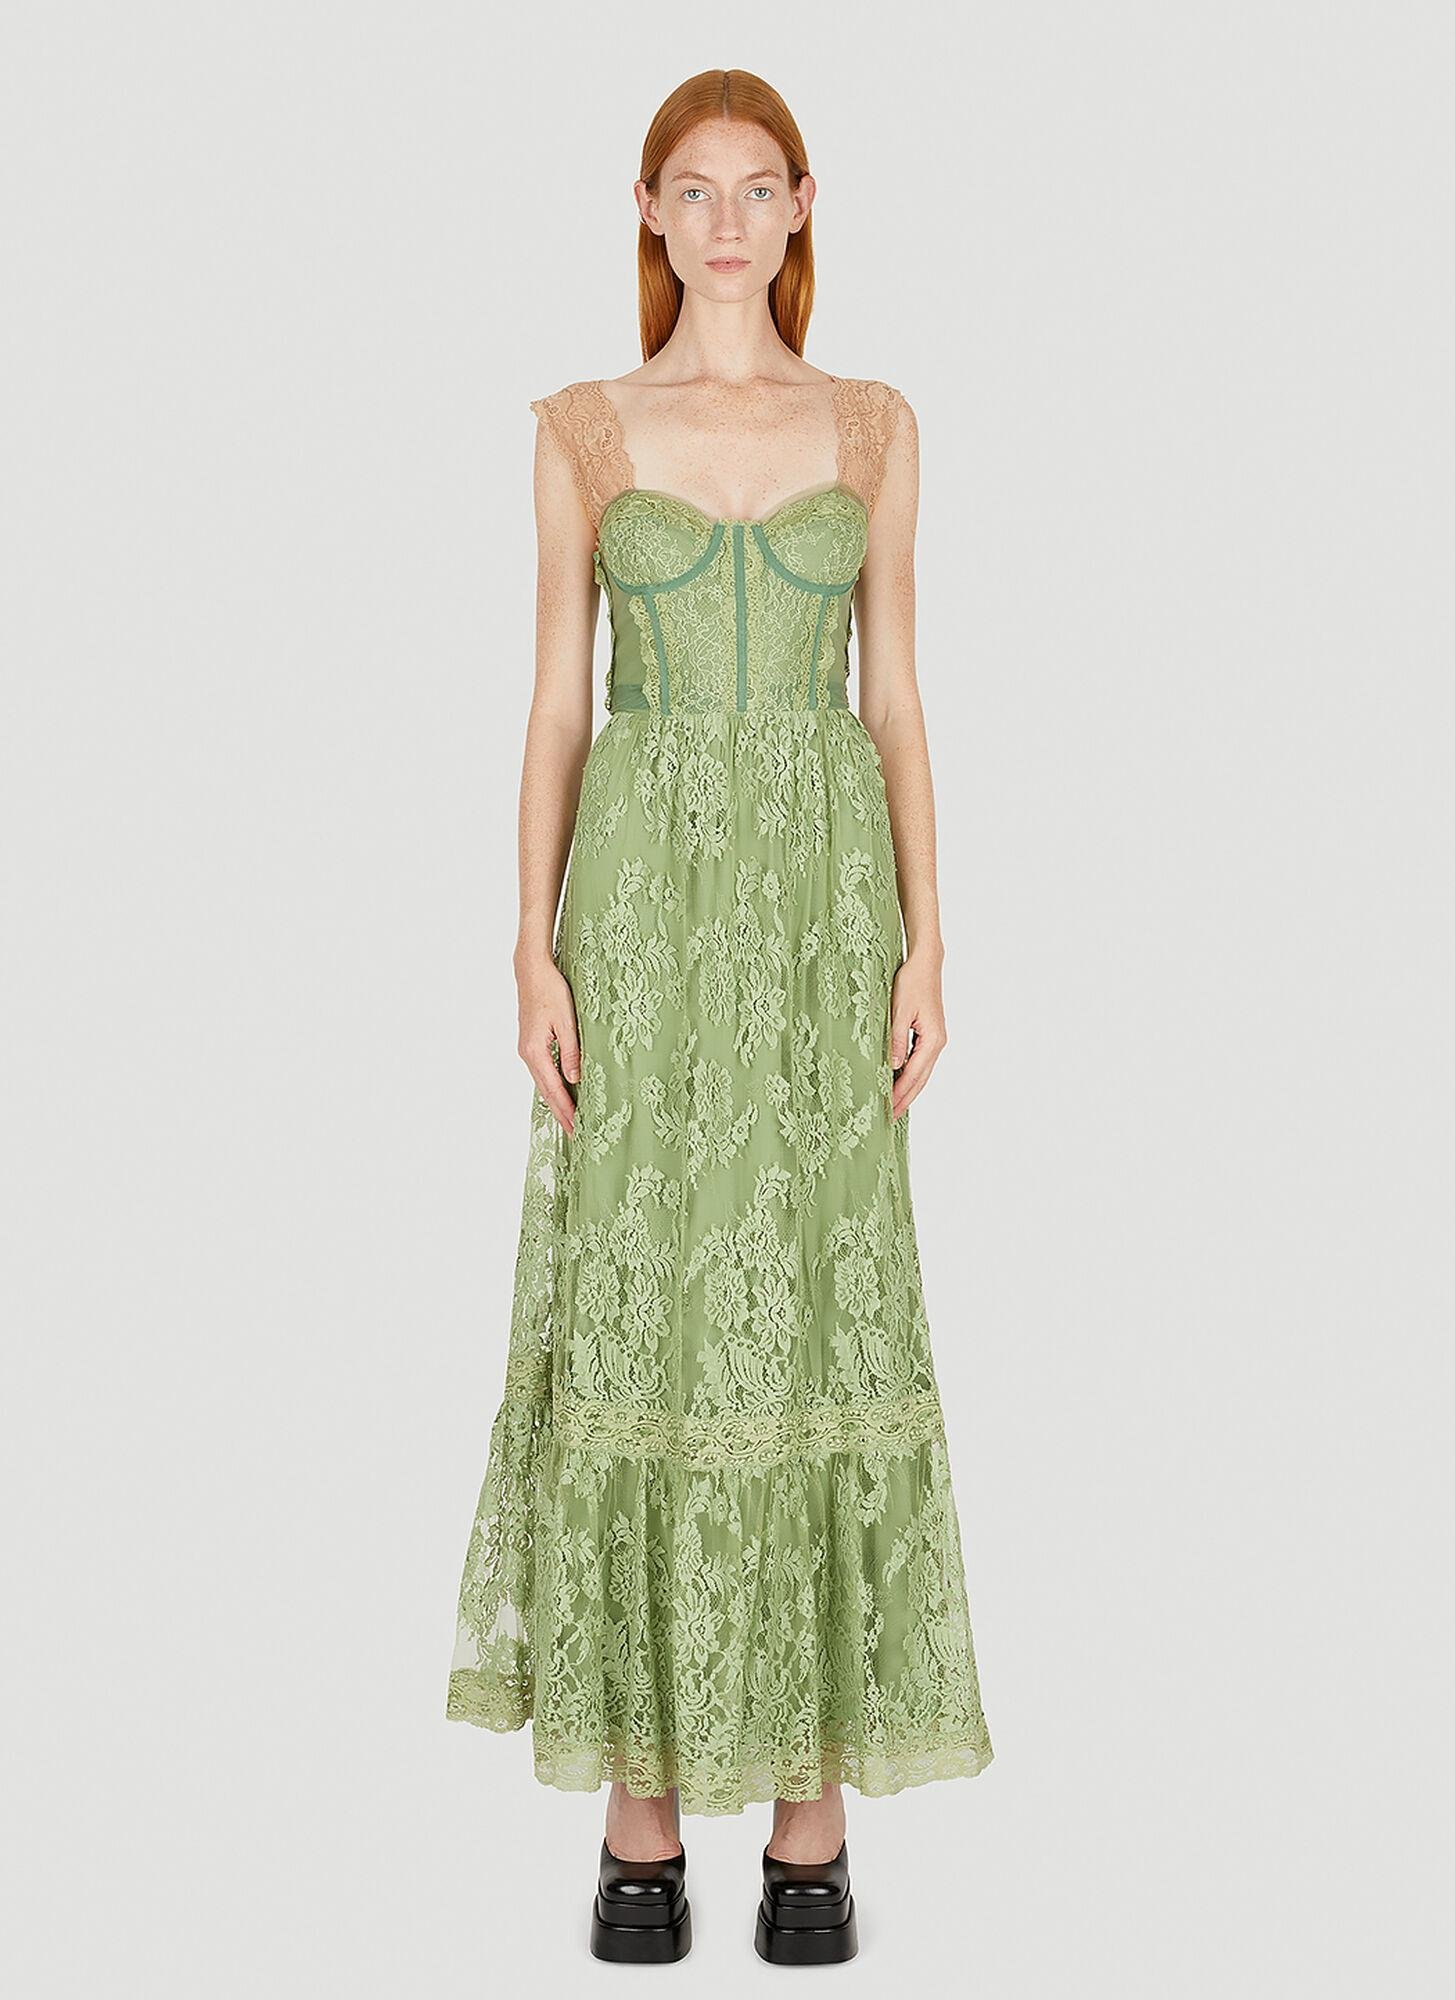 Gucci Floral Lace Gown in Green